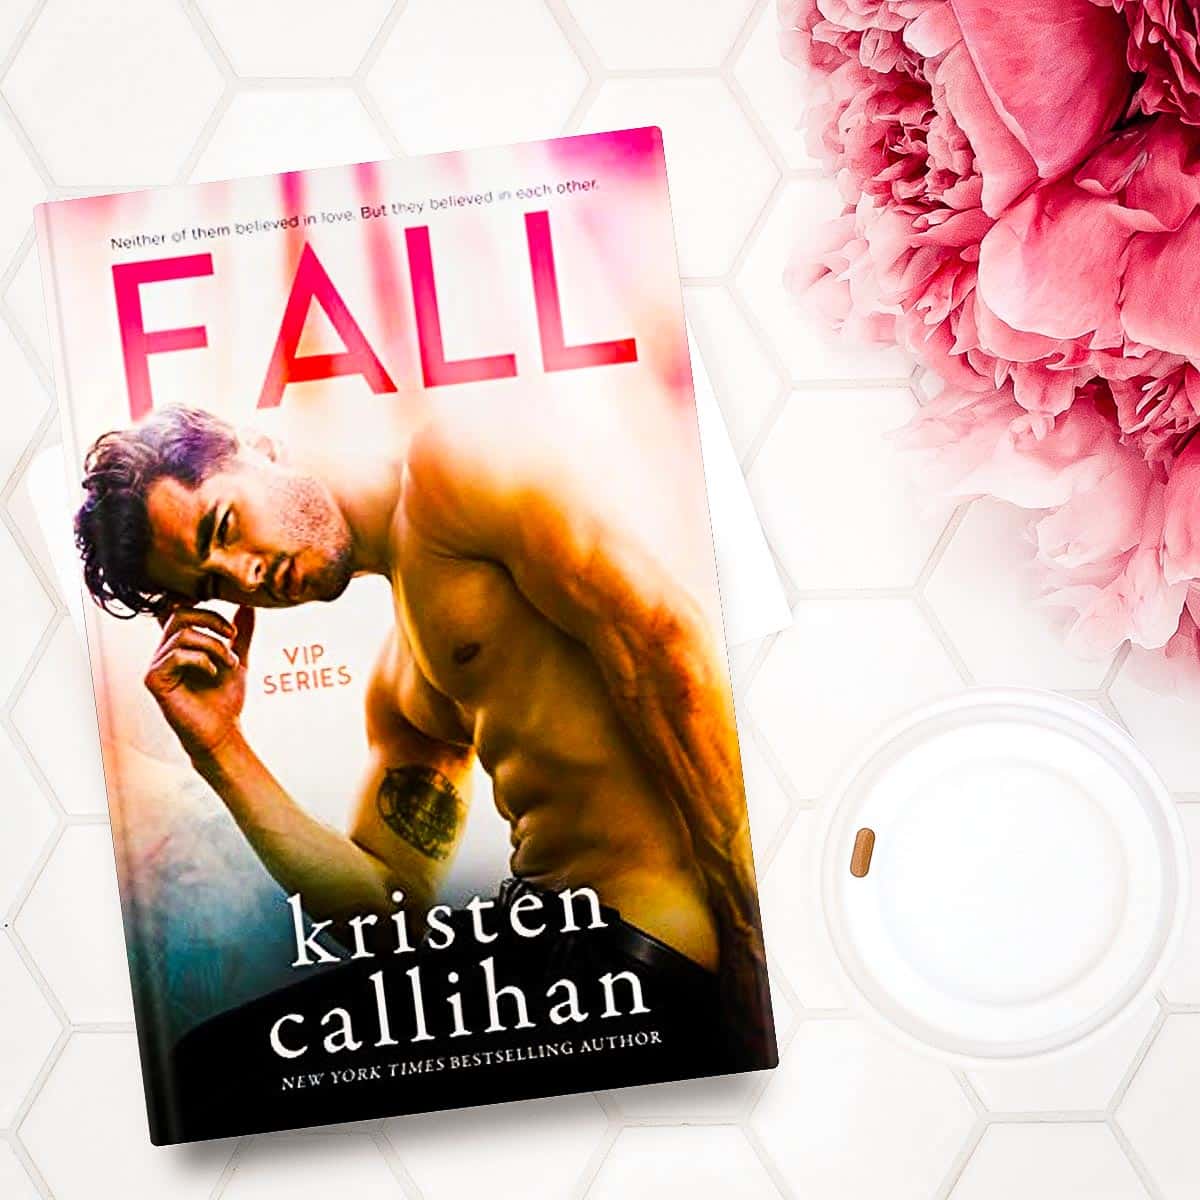 Fall by Kristen Callihan, VIP Book 3, is an emotional rockstar romance loaded with tons of humor and heart while tackling some heavy mental health topics